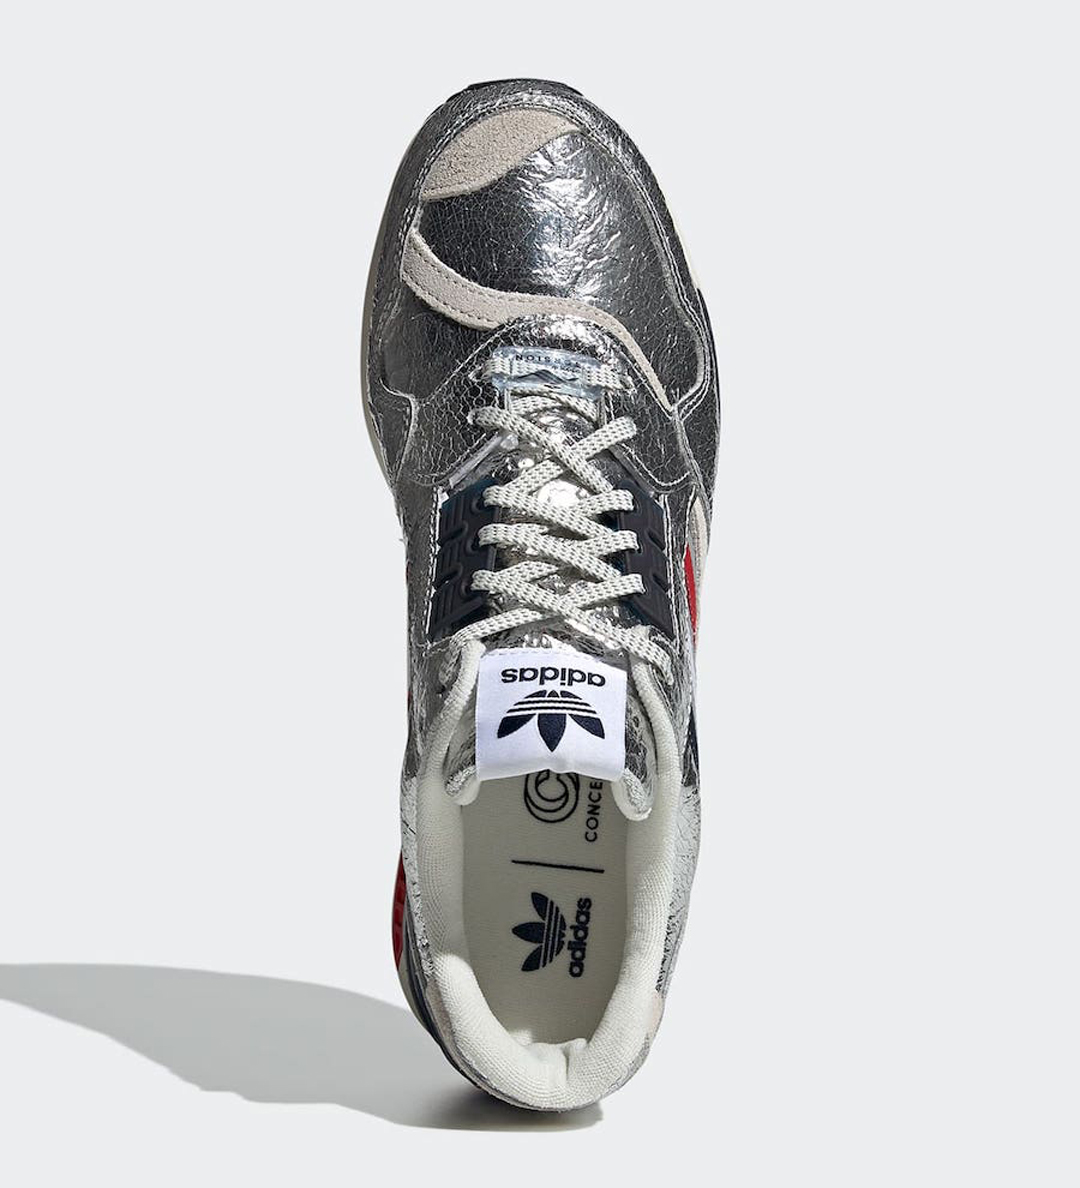 concepts-x-adidas-zx-9000-silver-foil-fx9966-release-date-06.jpg